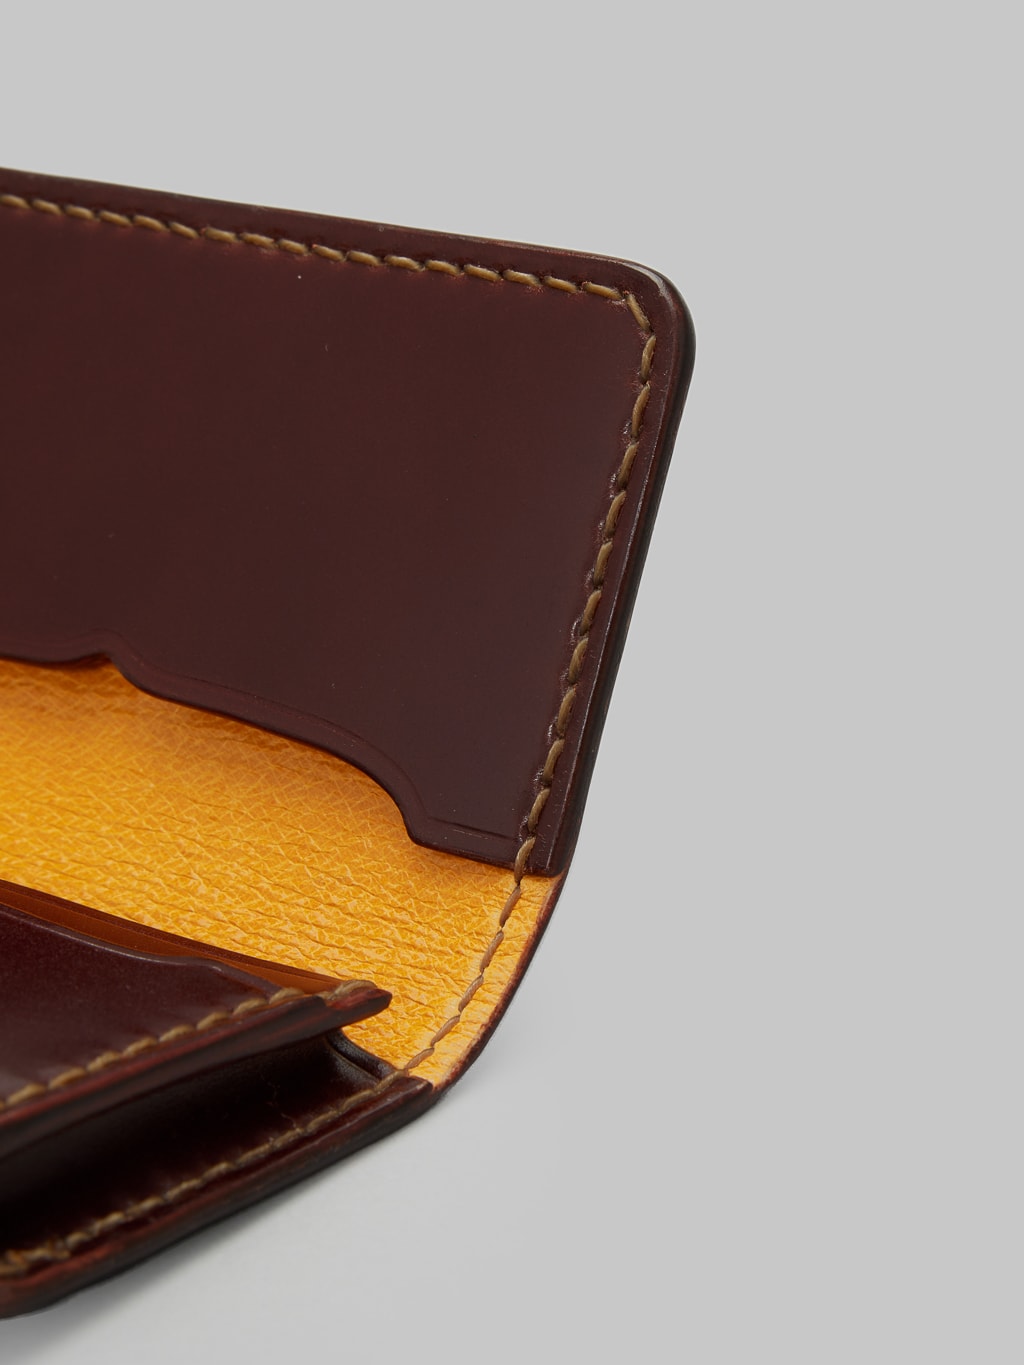 The Flat Head handsewn small cordovan card case brown yellow lining